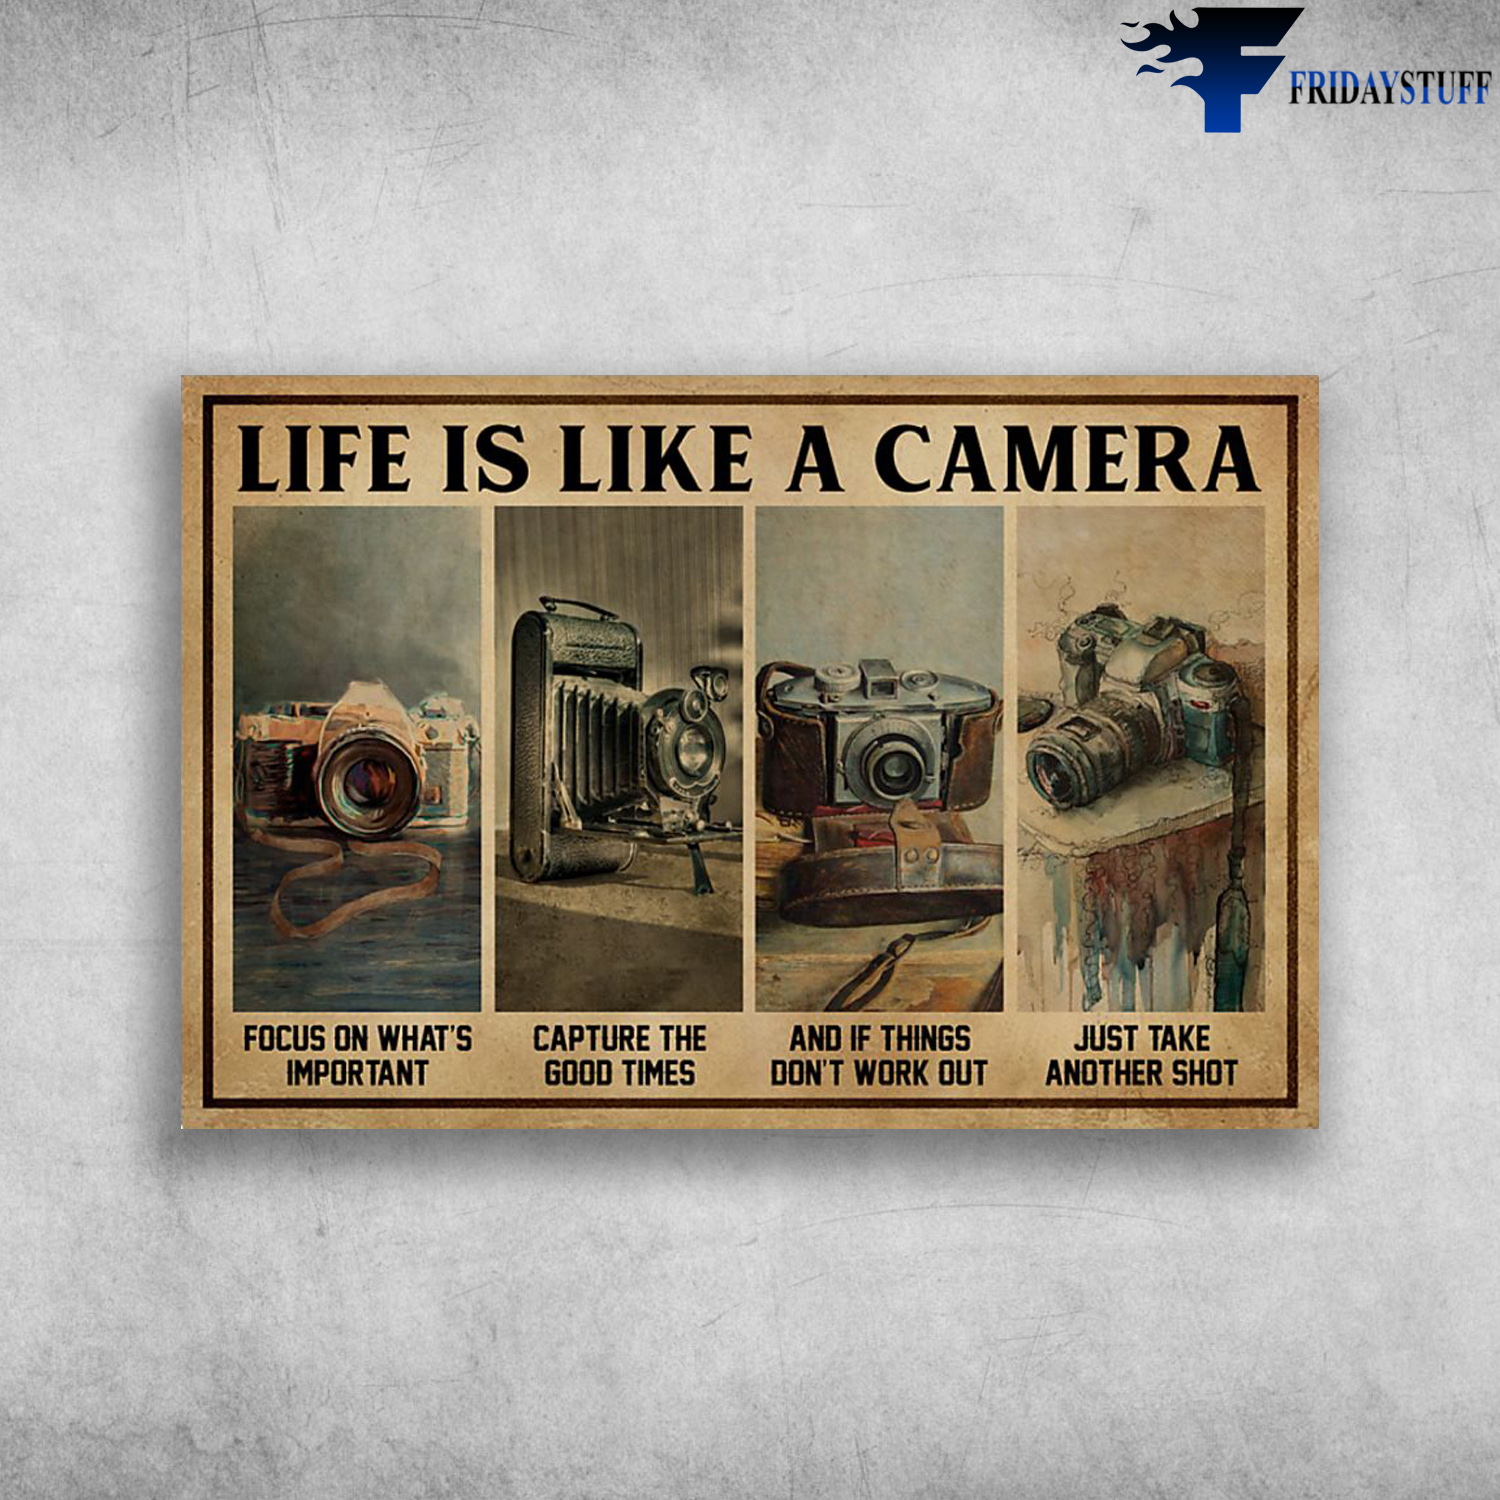 The Camera - Life Is Like A Camera, Focus On What's Important, Capture The Good Times, And If Things Don't Work Out, Just Take Another Shot